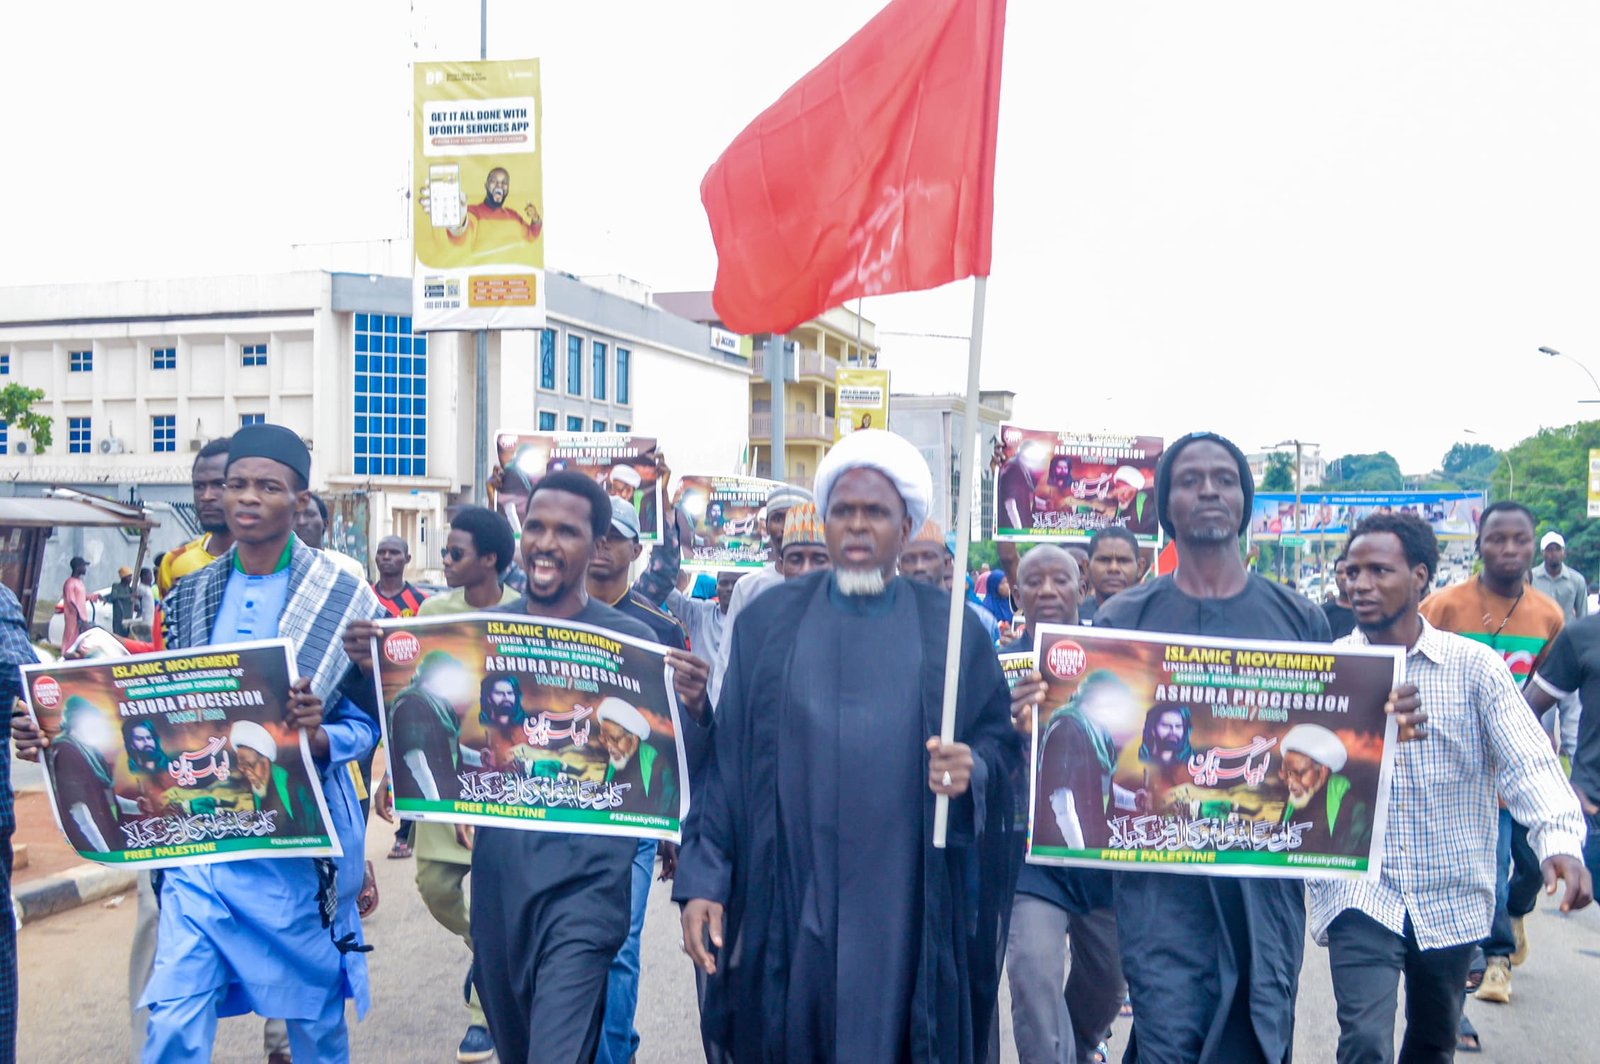 Ashura: Shiites hold peaceful procession in Abuja, call for support for Palestinians